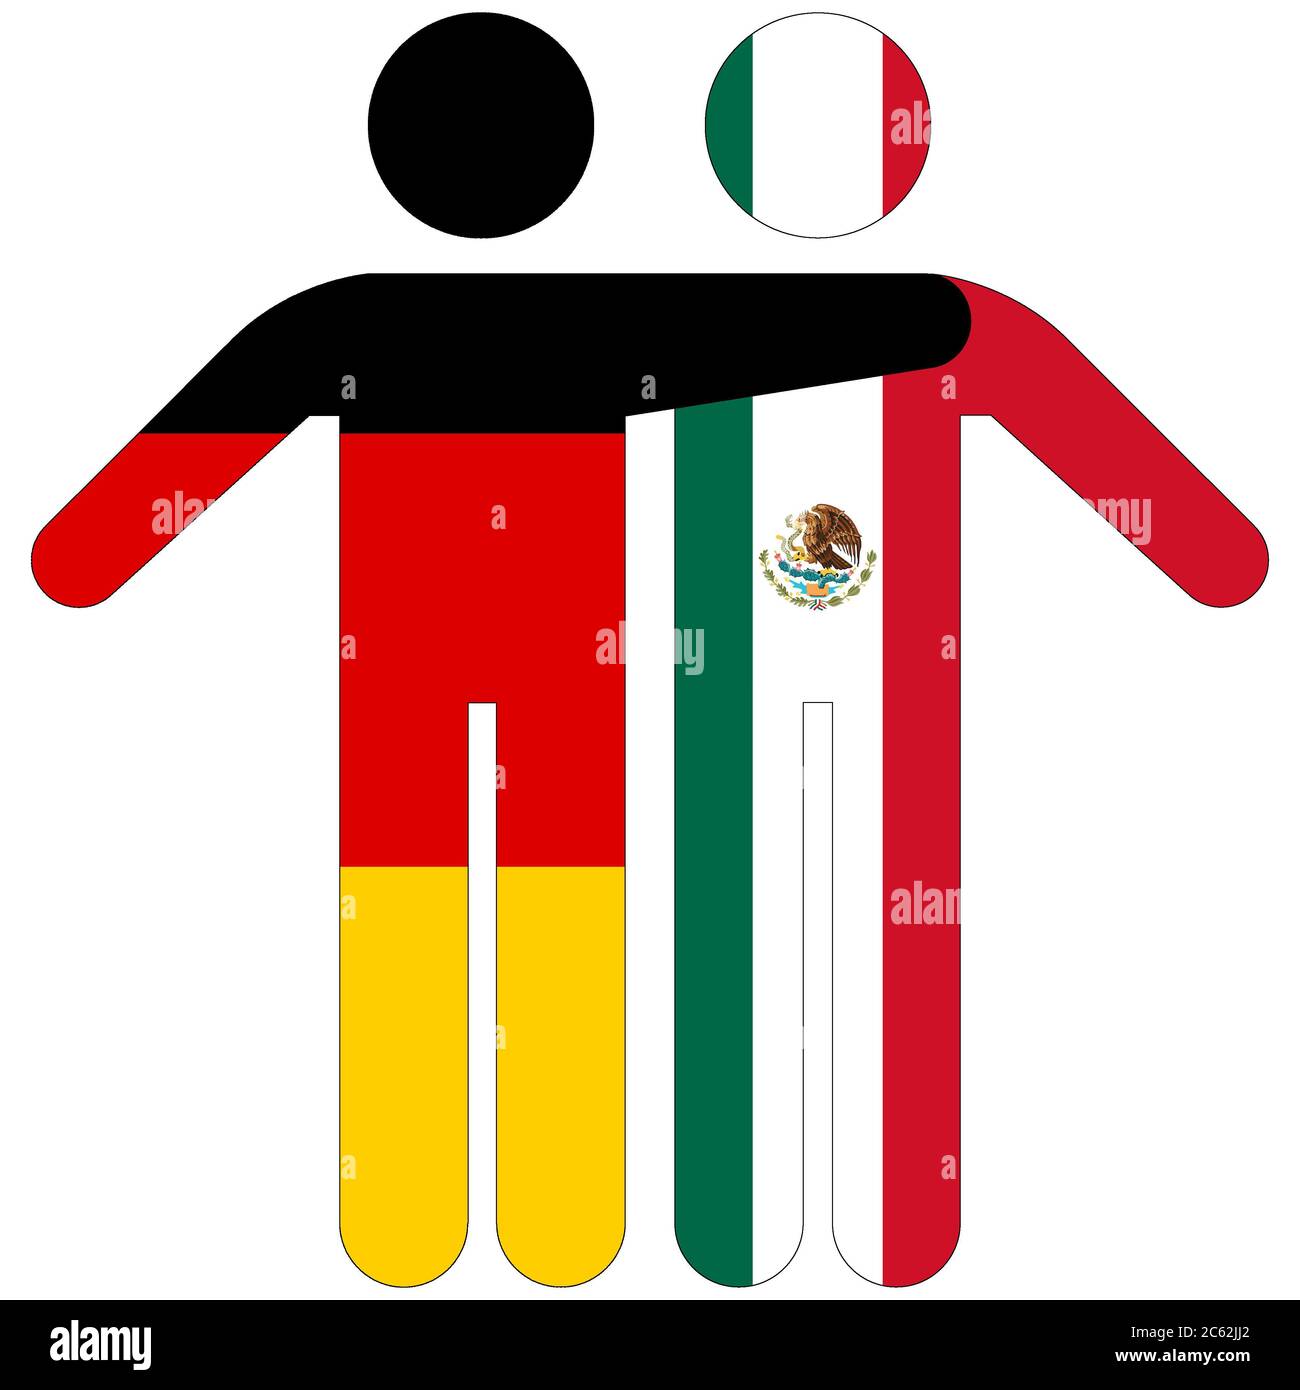 Germany - Mexico / friendship concept on white background Stock Photo